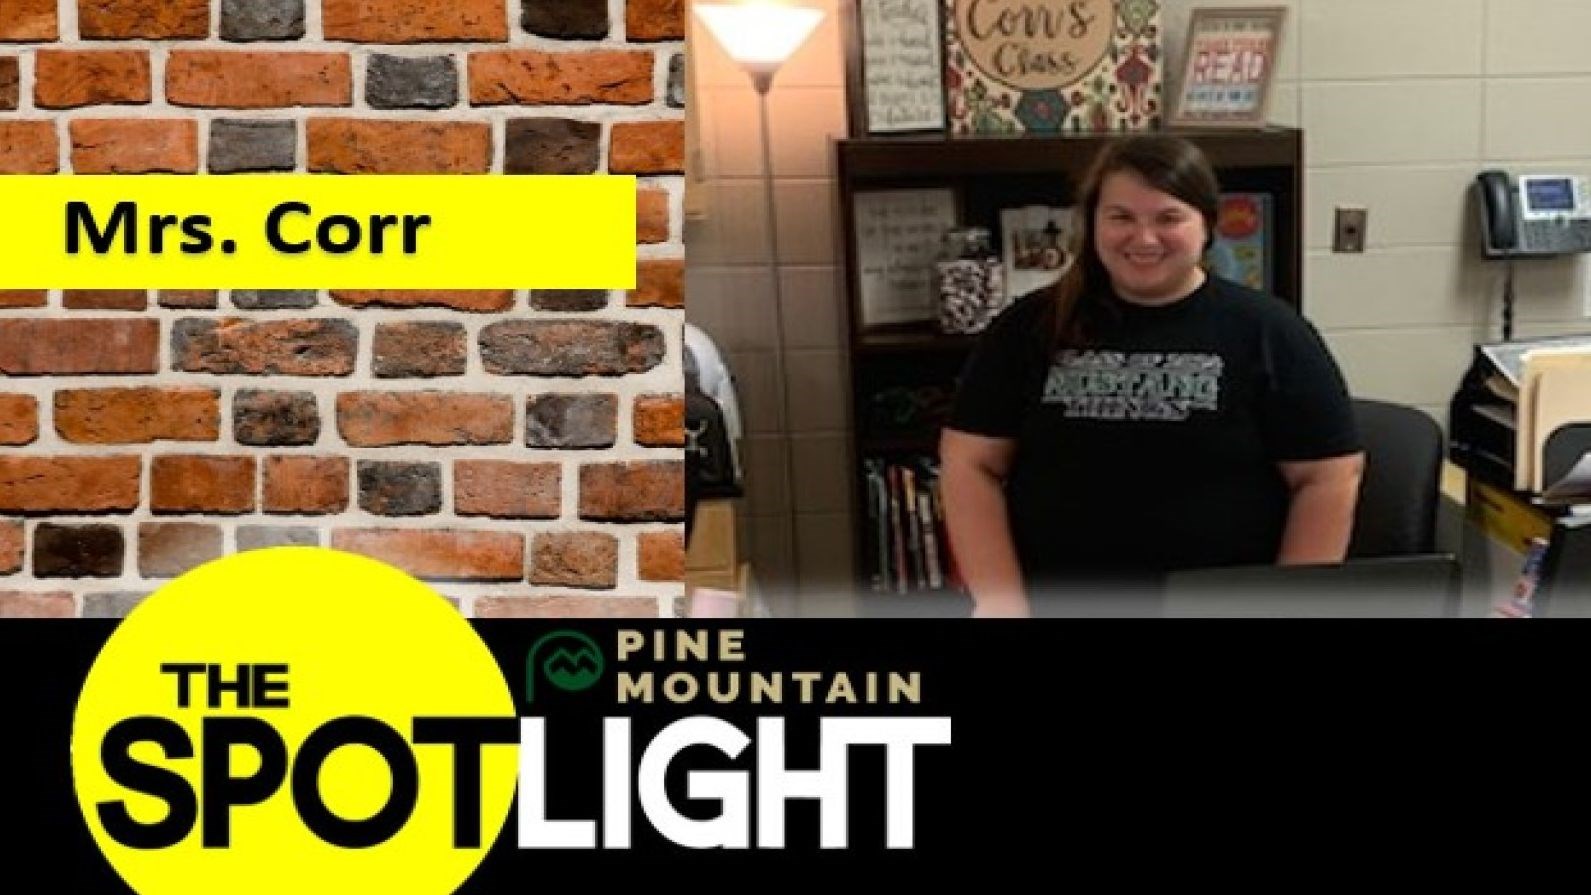 Ms. Corr featured with Pine Mountain Spotlight